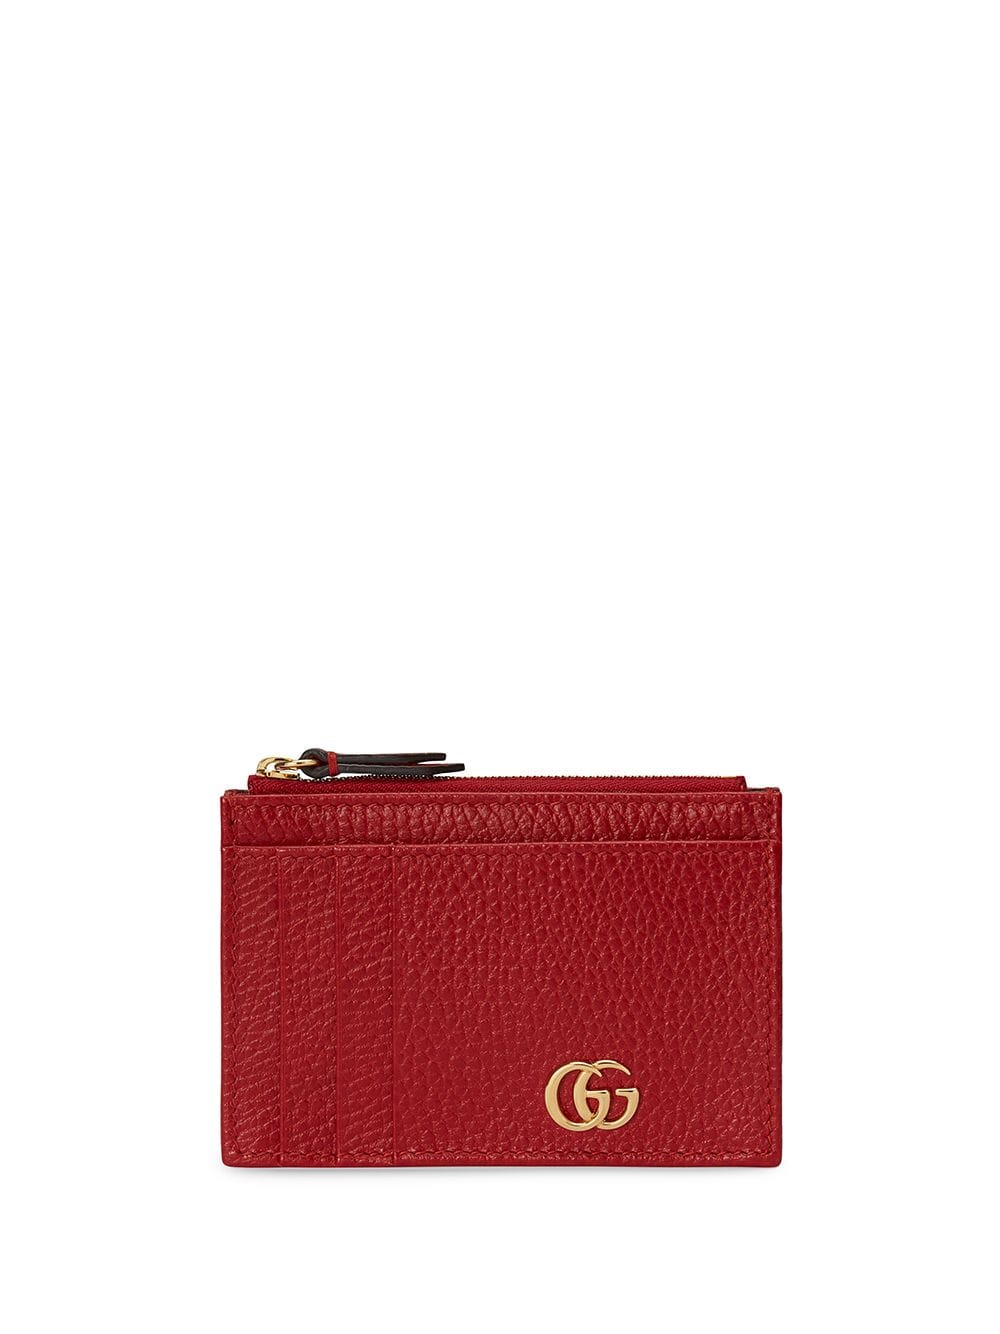 Gucci - Gg Marmont Card Holder | ABOUT ICONS